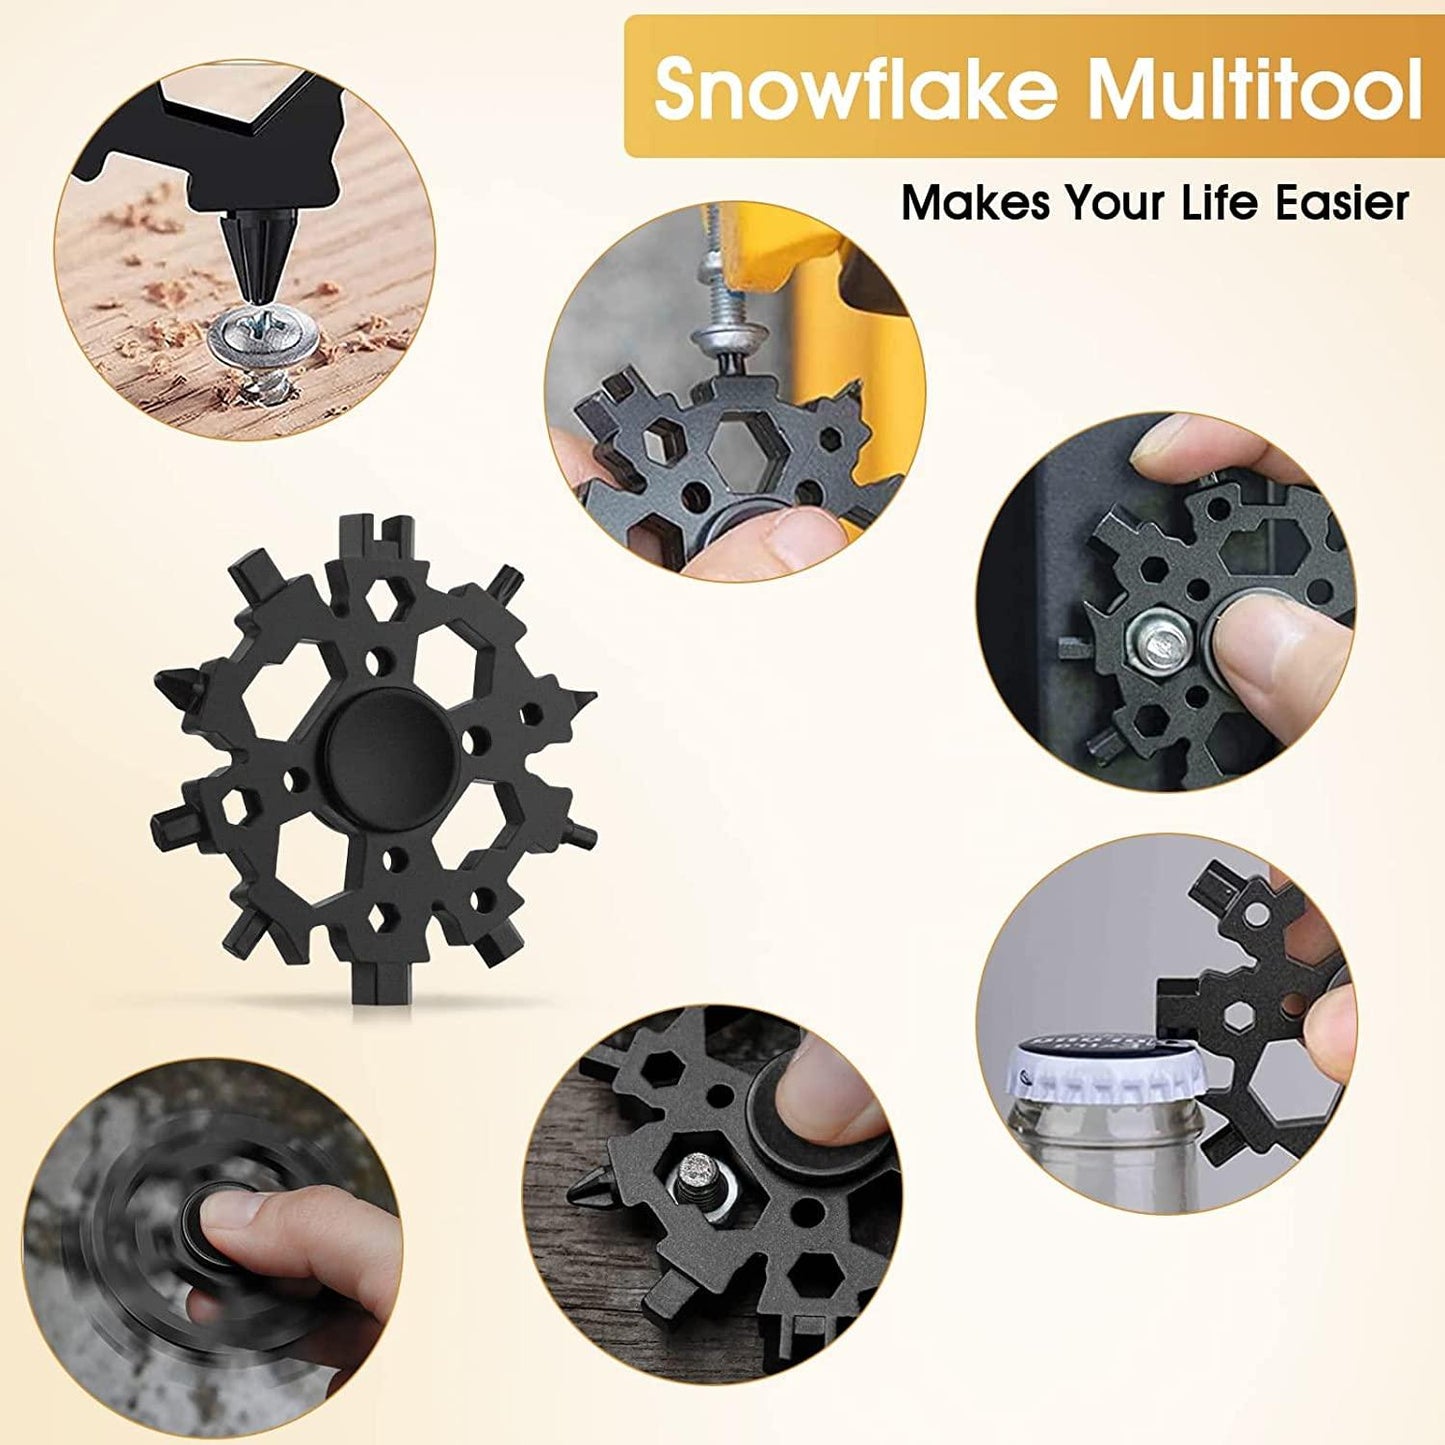 23-IN-1 Snowflake Multitool With Fidget Spinner, Gifts for Him Boyfriend Husband Men, Stainless Steel Multi-Tool Portable Cool Gadgets for Men, Suitable for Hiking, Camping, Home Improvement Wintory